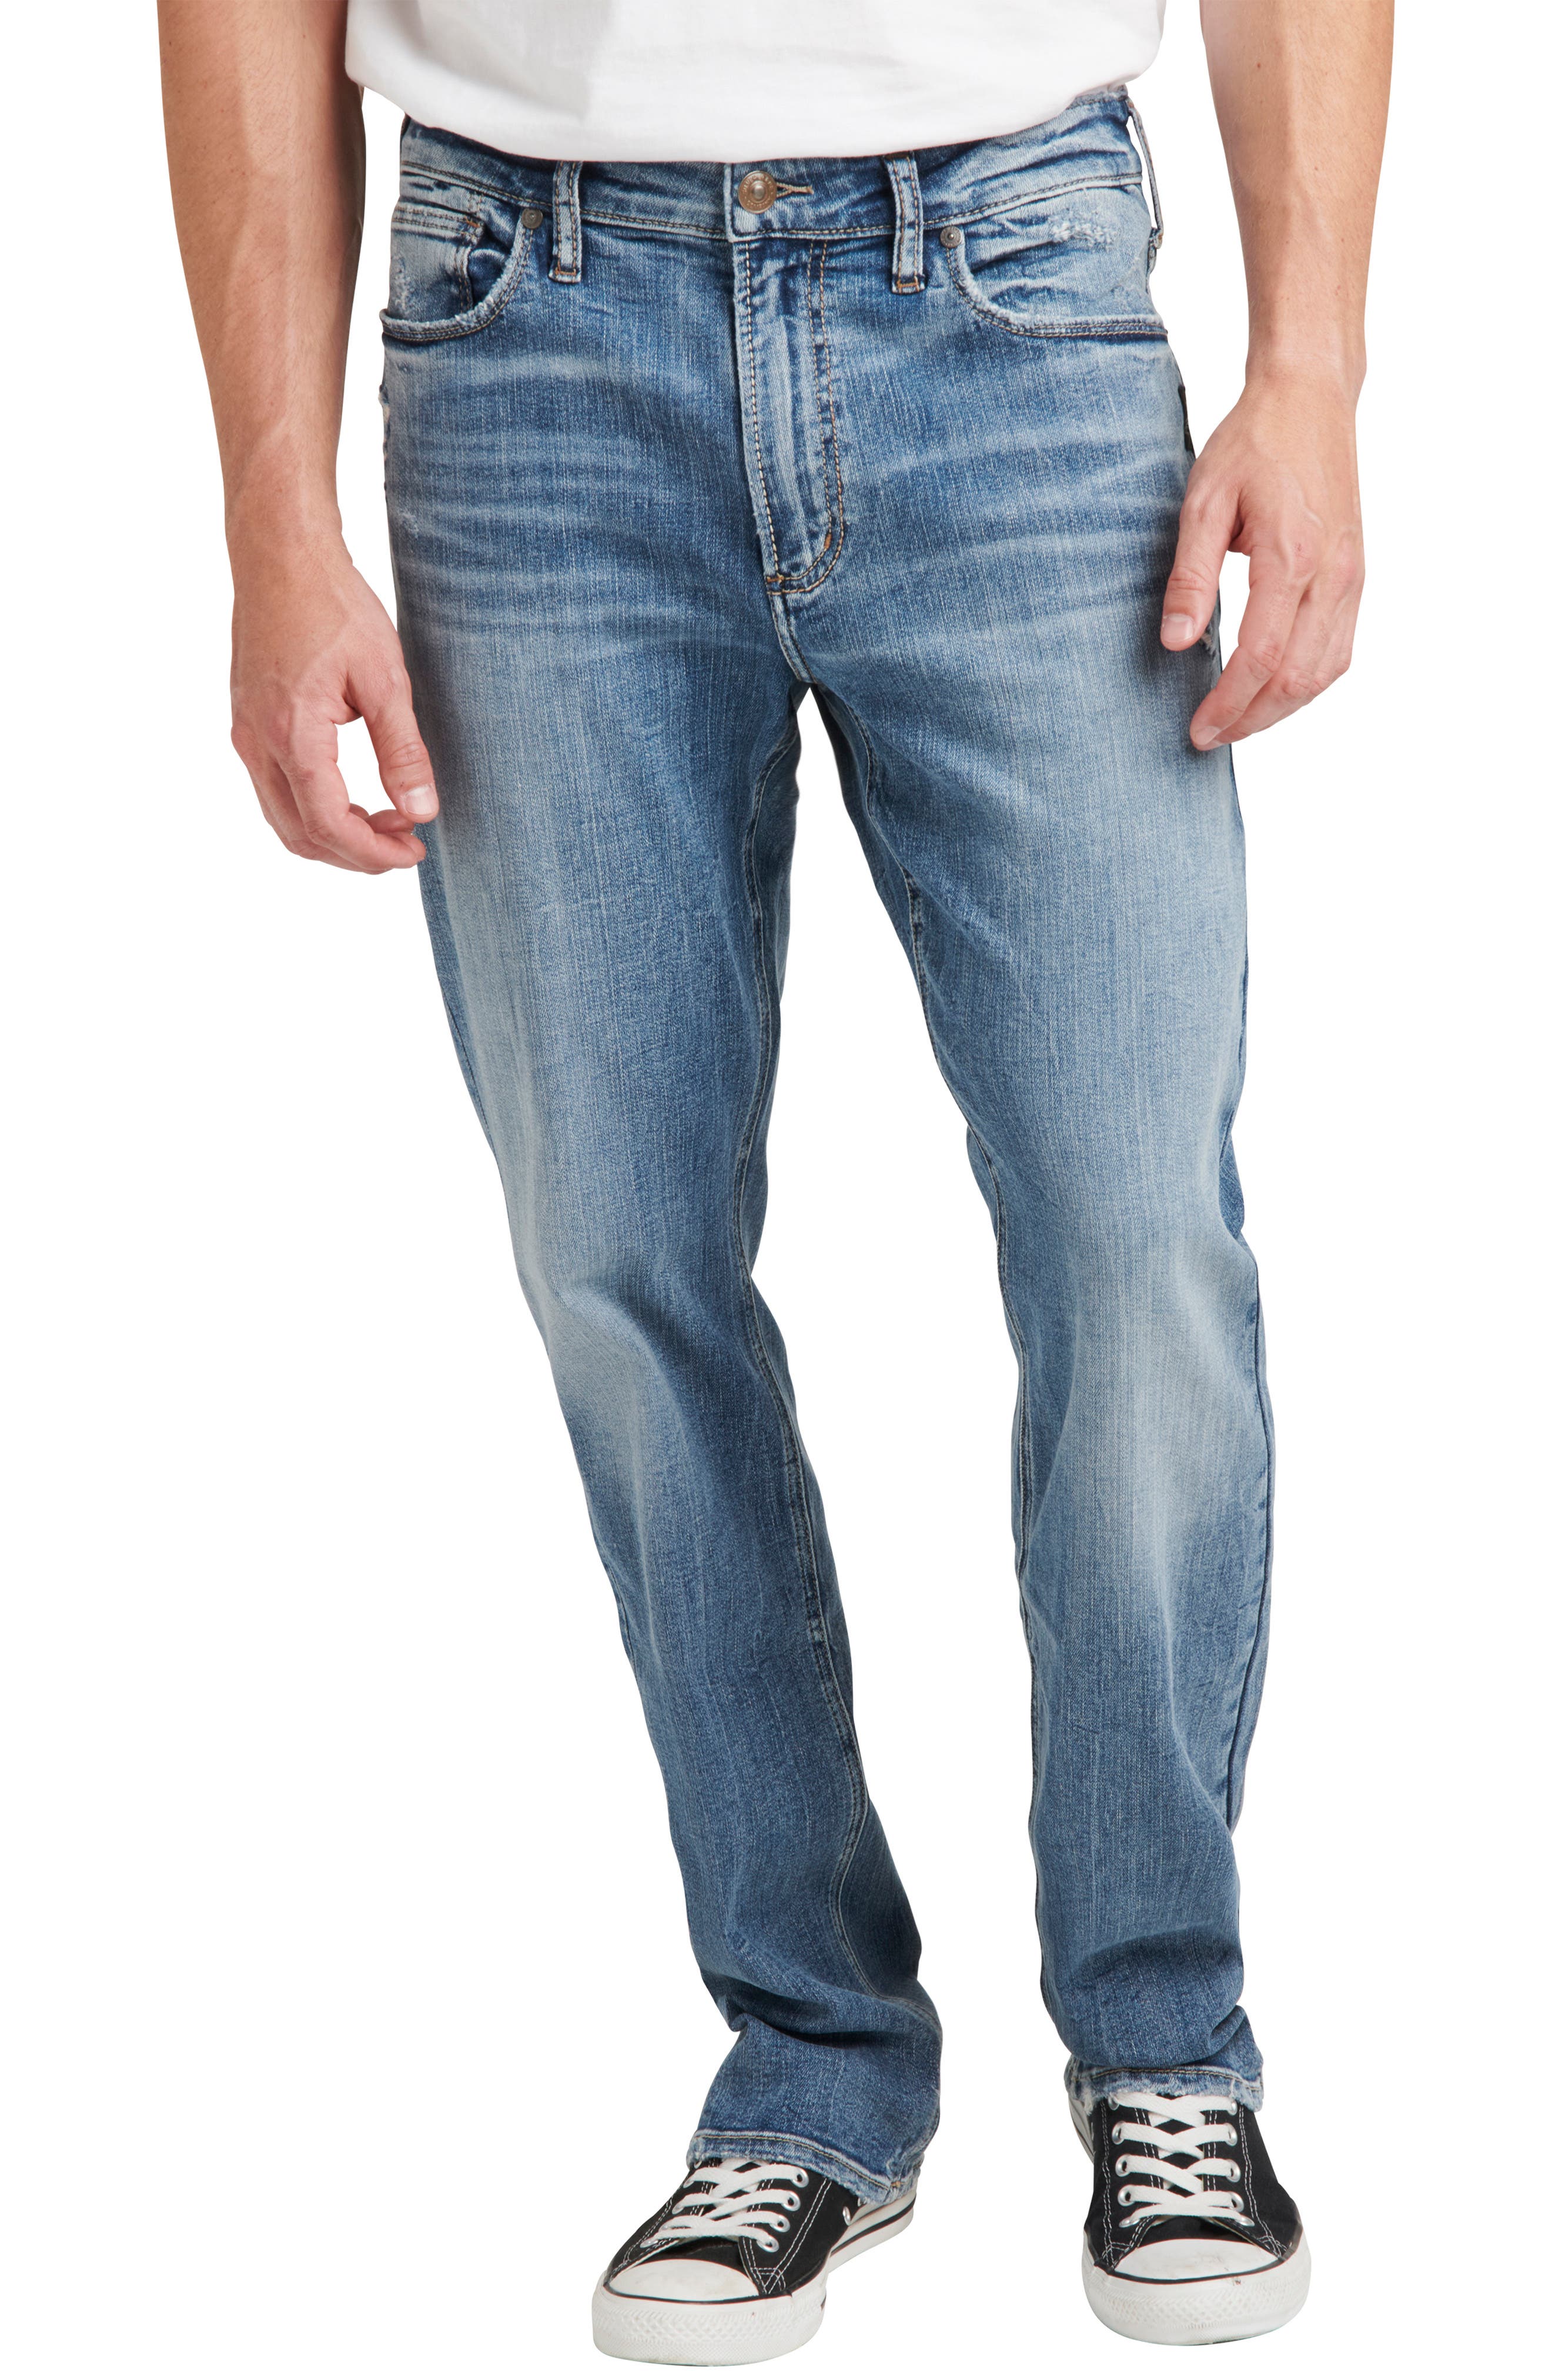 Silver Jeans Co. Grayson Easy Fit Straight Leg Jeans in Indigo